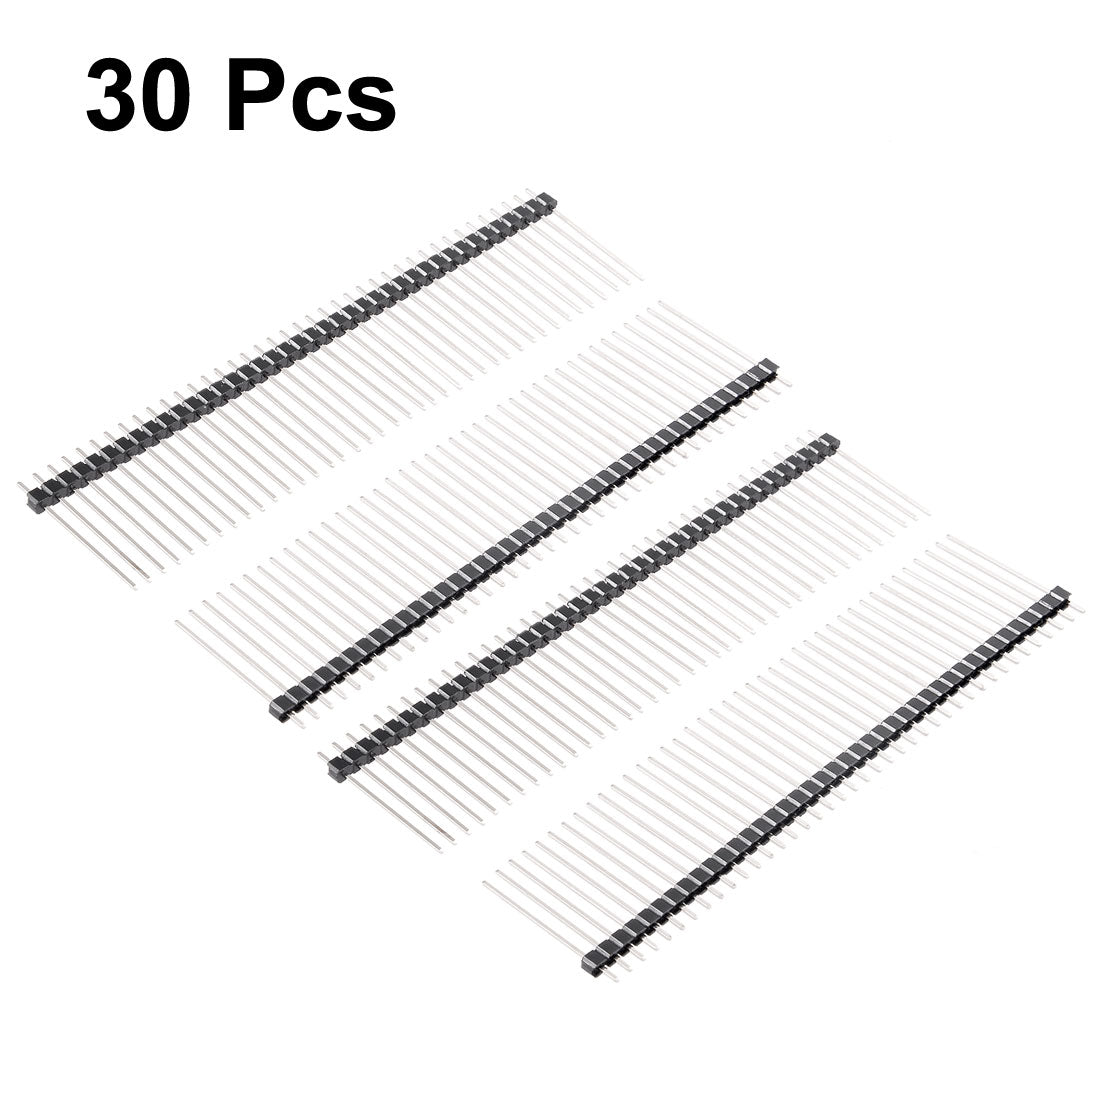 uxcell Uxcell 30Pcs 2.54mm Pitch 40-Pin 28mm Length Single Row Straight Connector Pin Header Strip for Arduino Prototype Shield